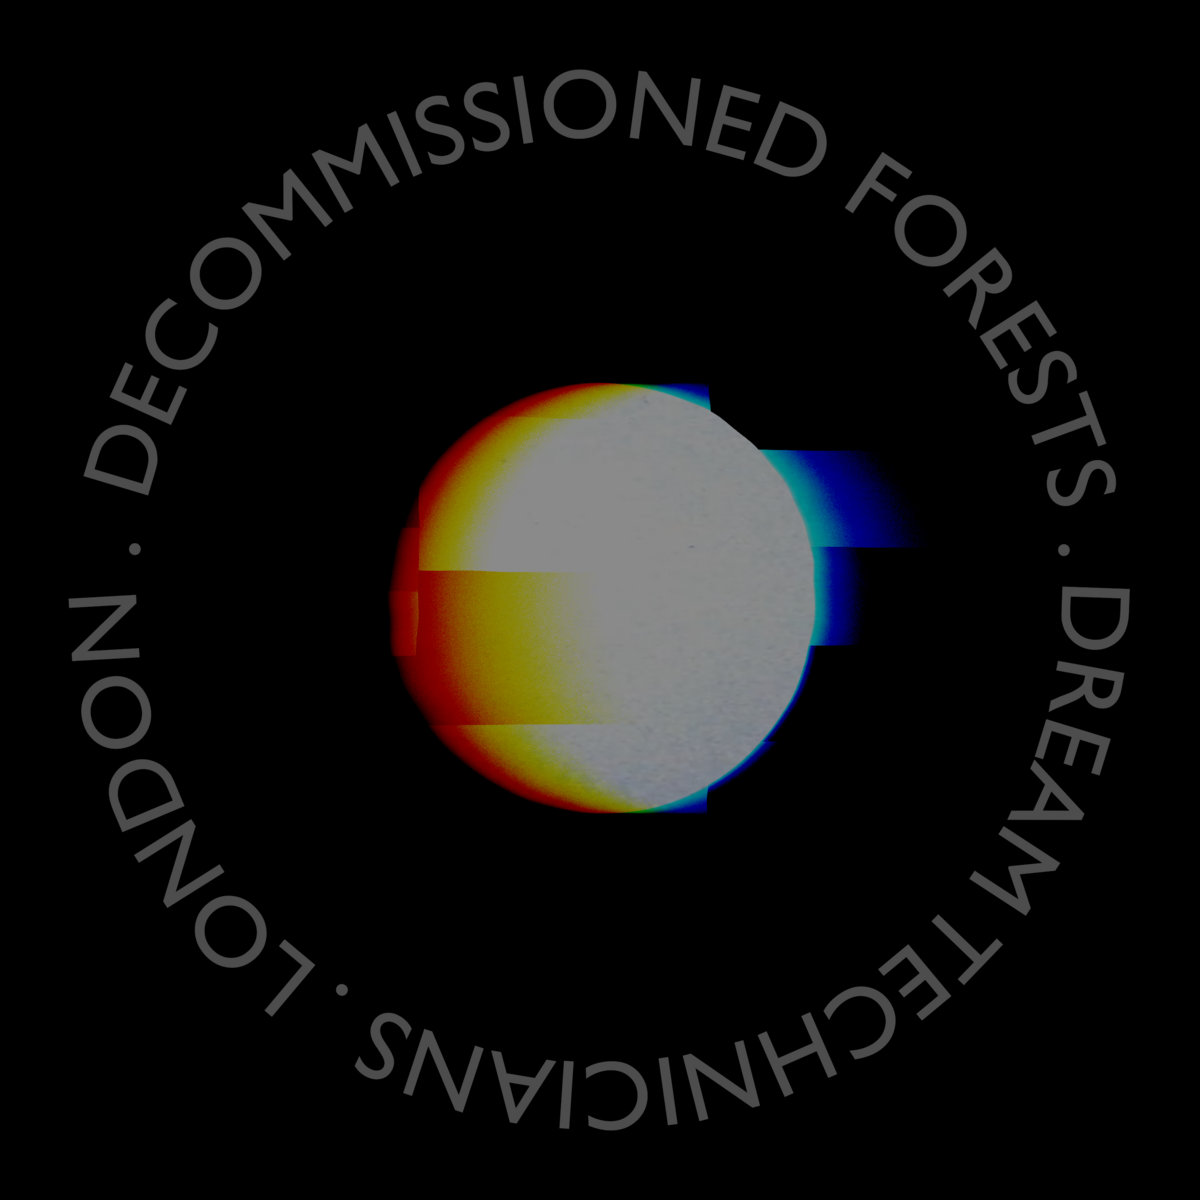 GUEST REVIEW: “Dream Technicians: London,” the New Bandcamp Sampler Comp from Decommissioned Forests